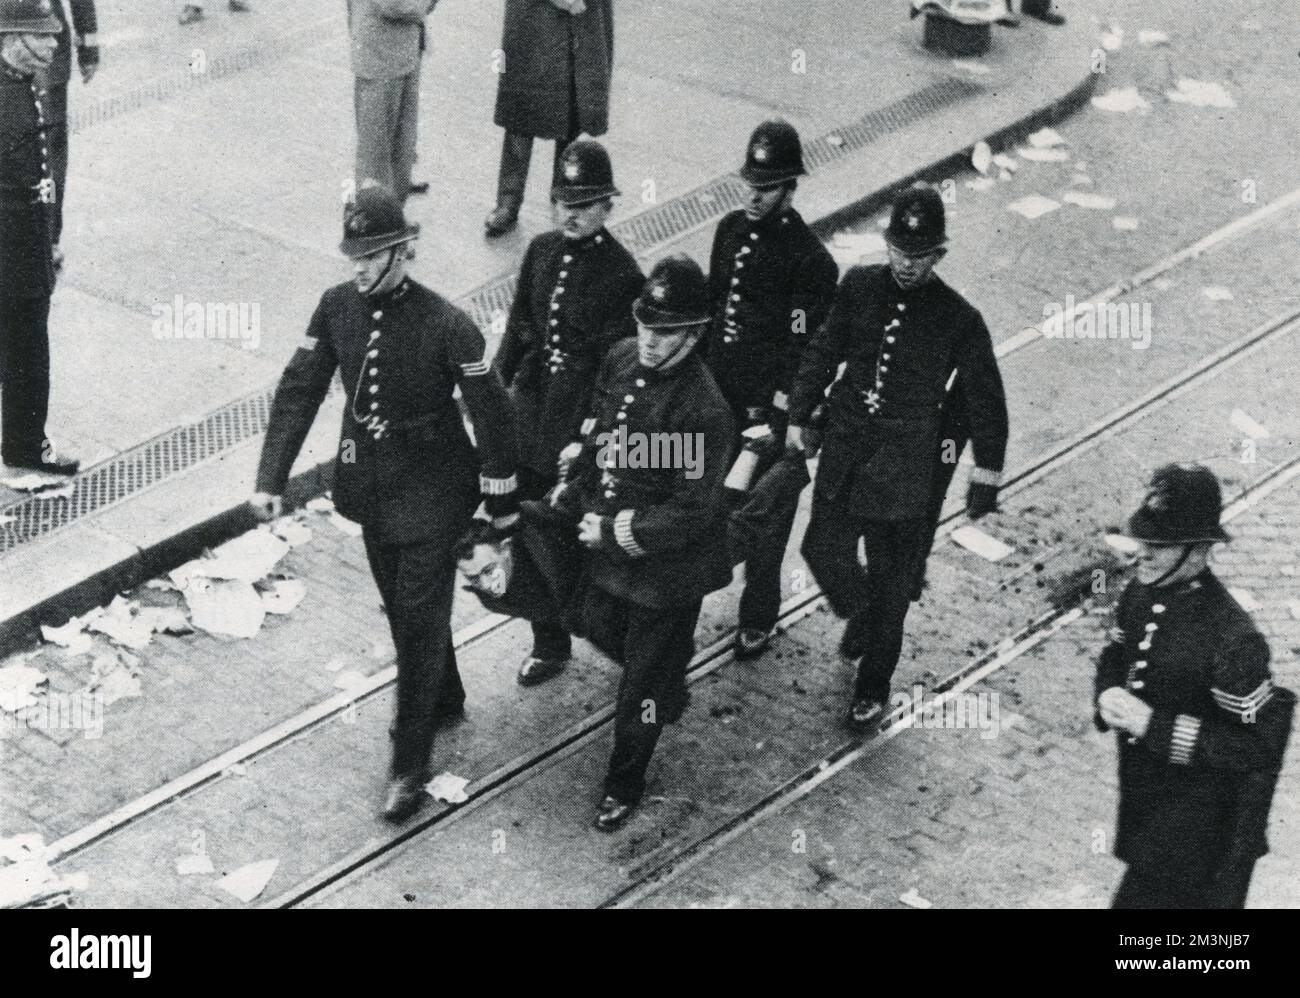 A demonstrator is carried away by five police officers, one of the 84 arrests made during the anti-fascist demonstration in the East End of London, in opposition to the proposed march there by Sir Oswald Mosley and the British Union of Fascists.     Date: 4 October 1936 Stock Photo